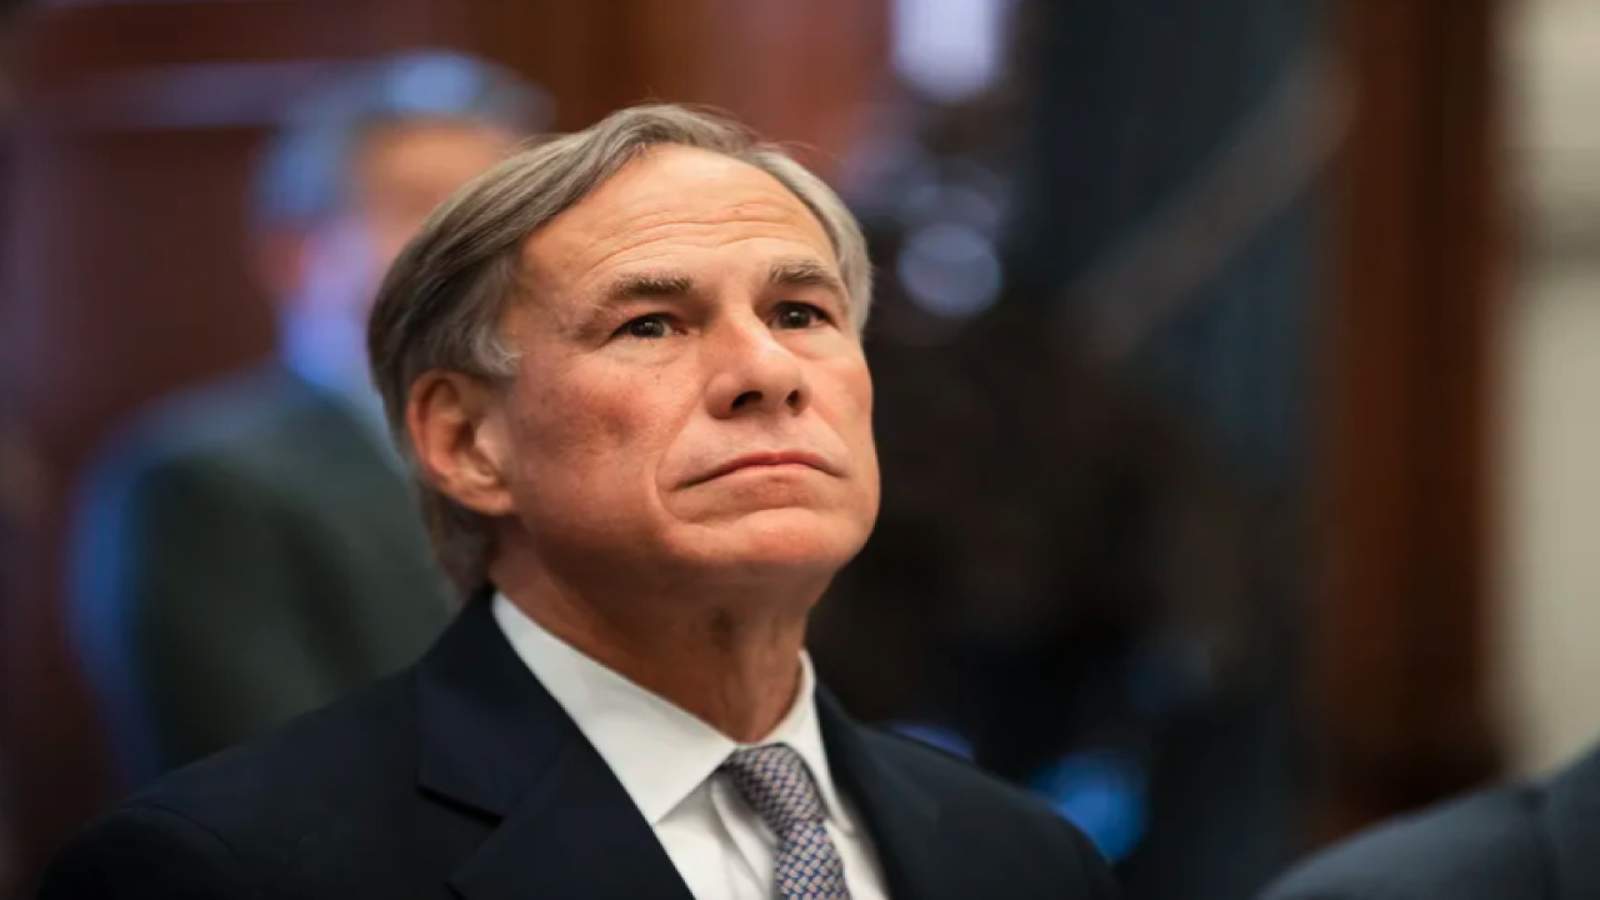 Texas governor says new announcement on reopening businesses will come next week